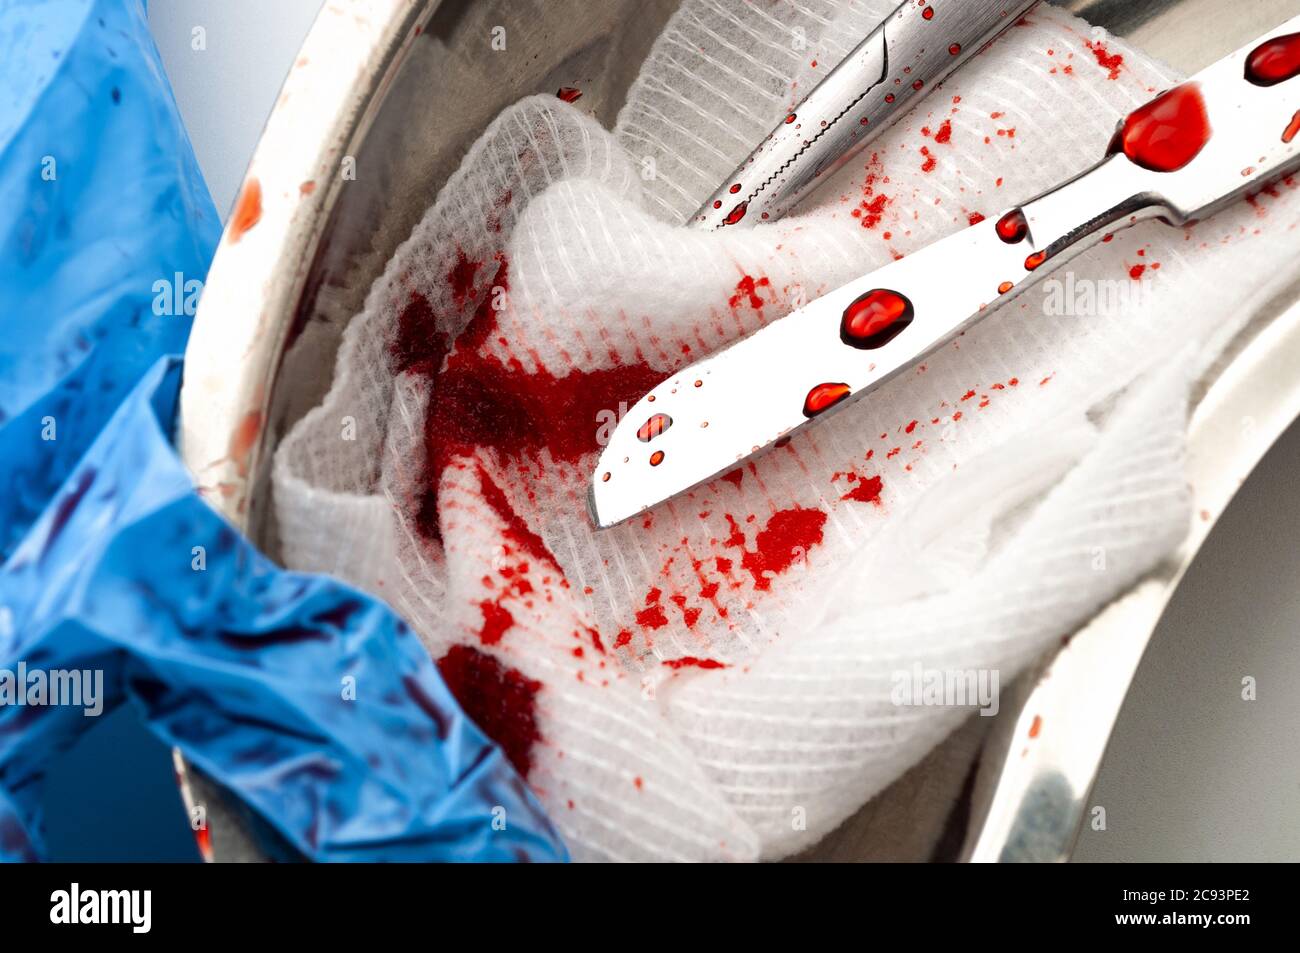 Surgery, OR instruments and dirty operating room concept theme with close up on scalpel, cotton swab, scissors and latex gloves covered in blood in a Stock Photo